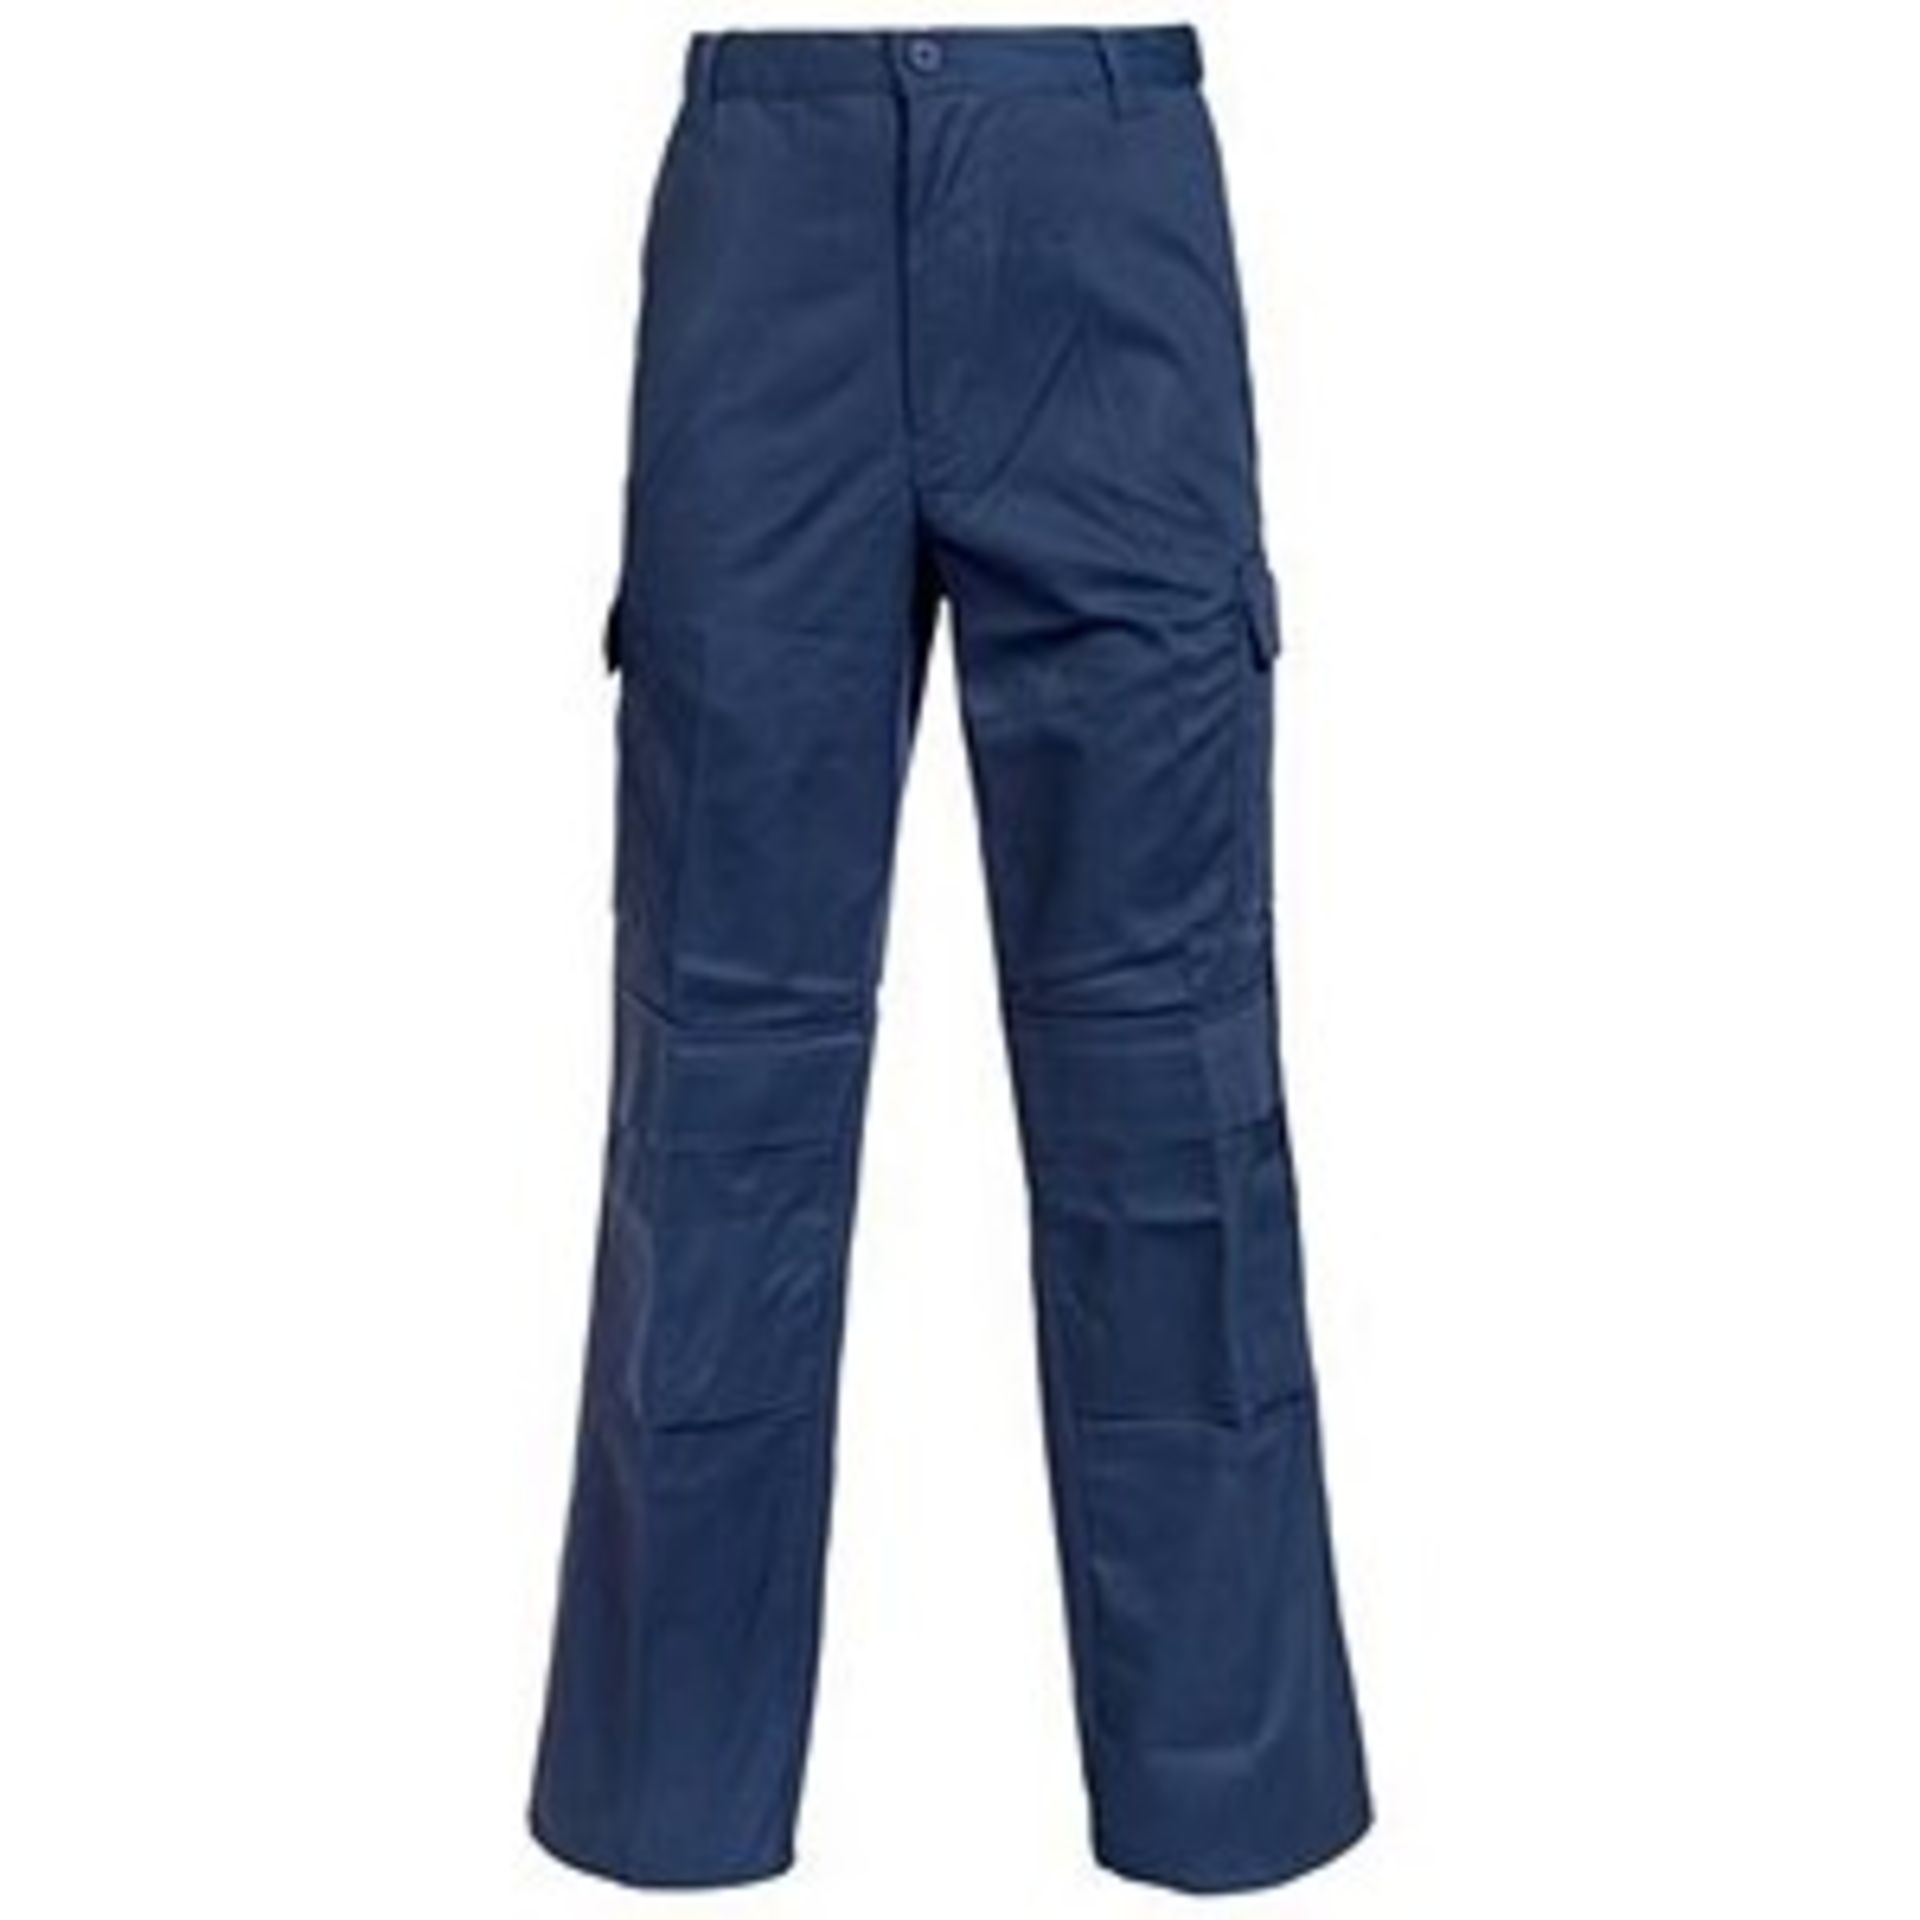 V Brand New A Lot Of Three Pairs Work Combat Trousers Size 28 ISP £11.98 Each (PaperStone)